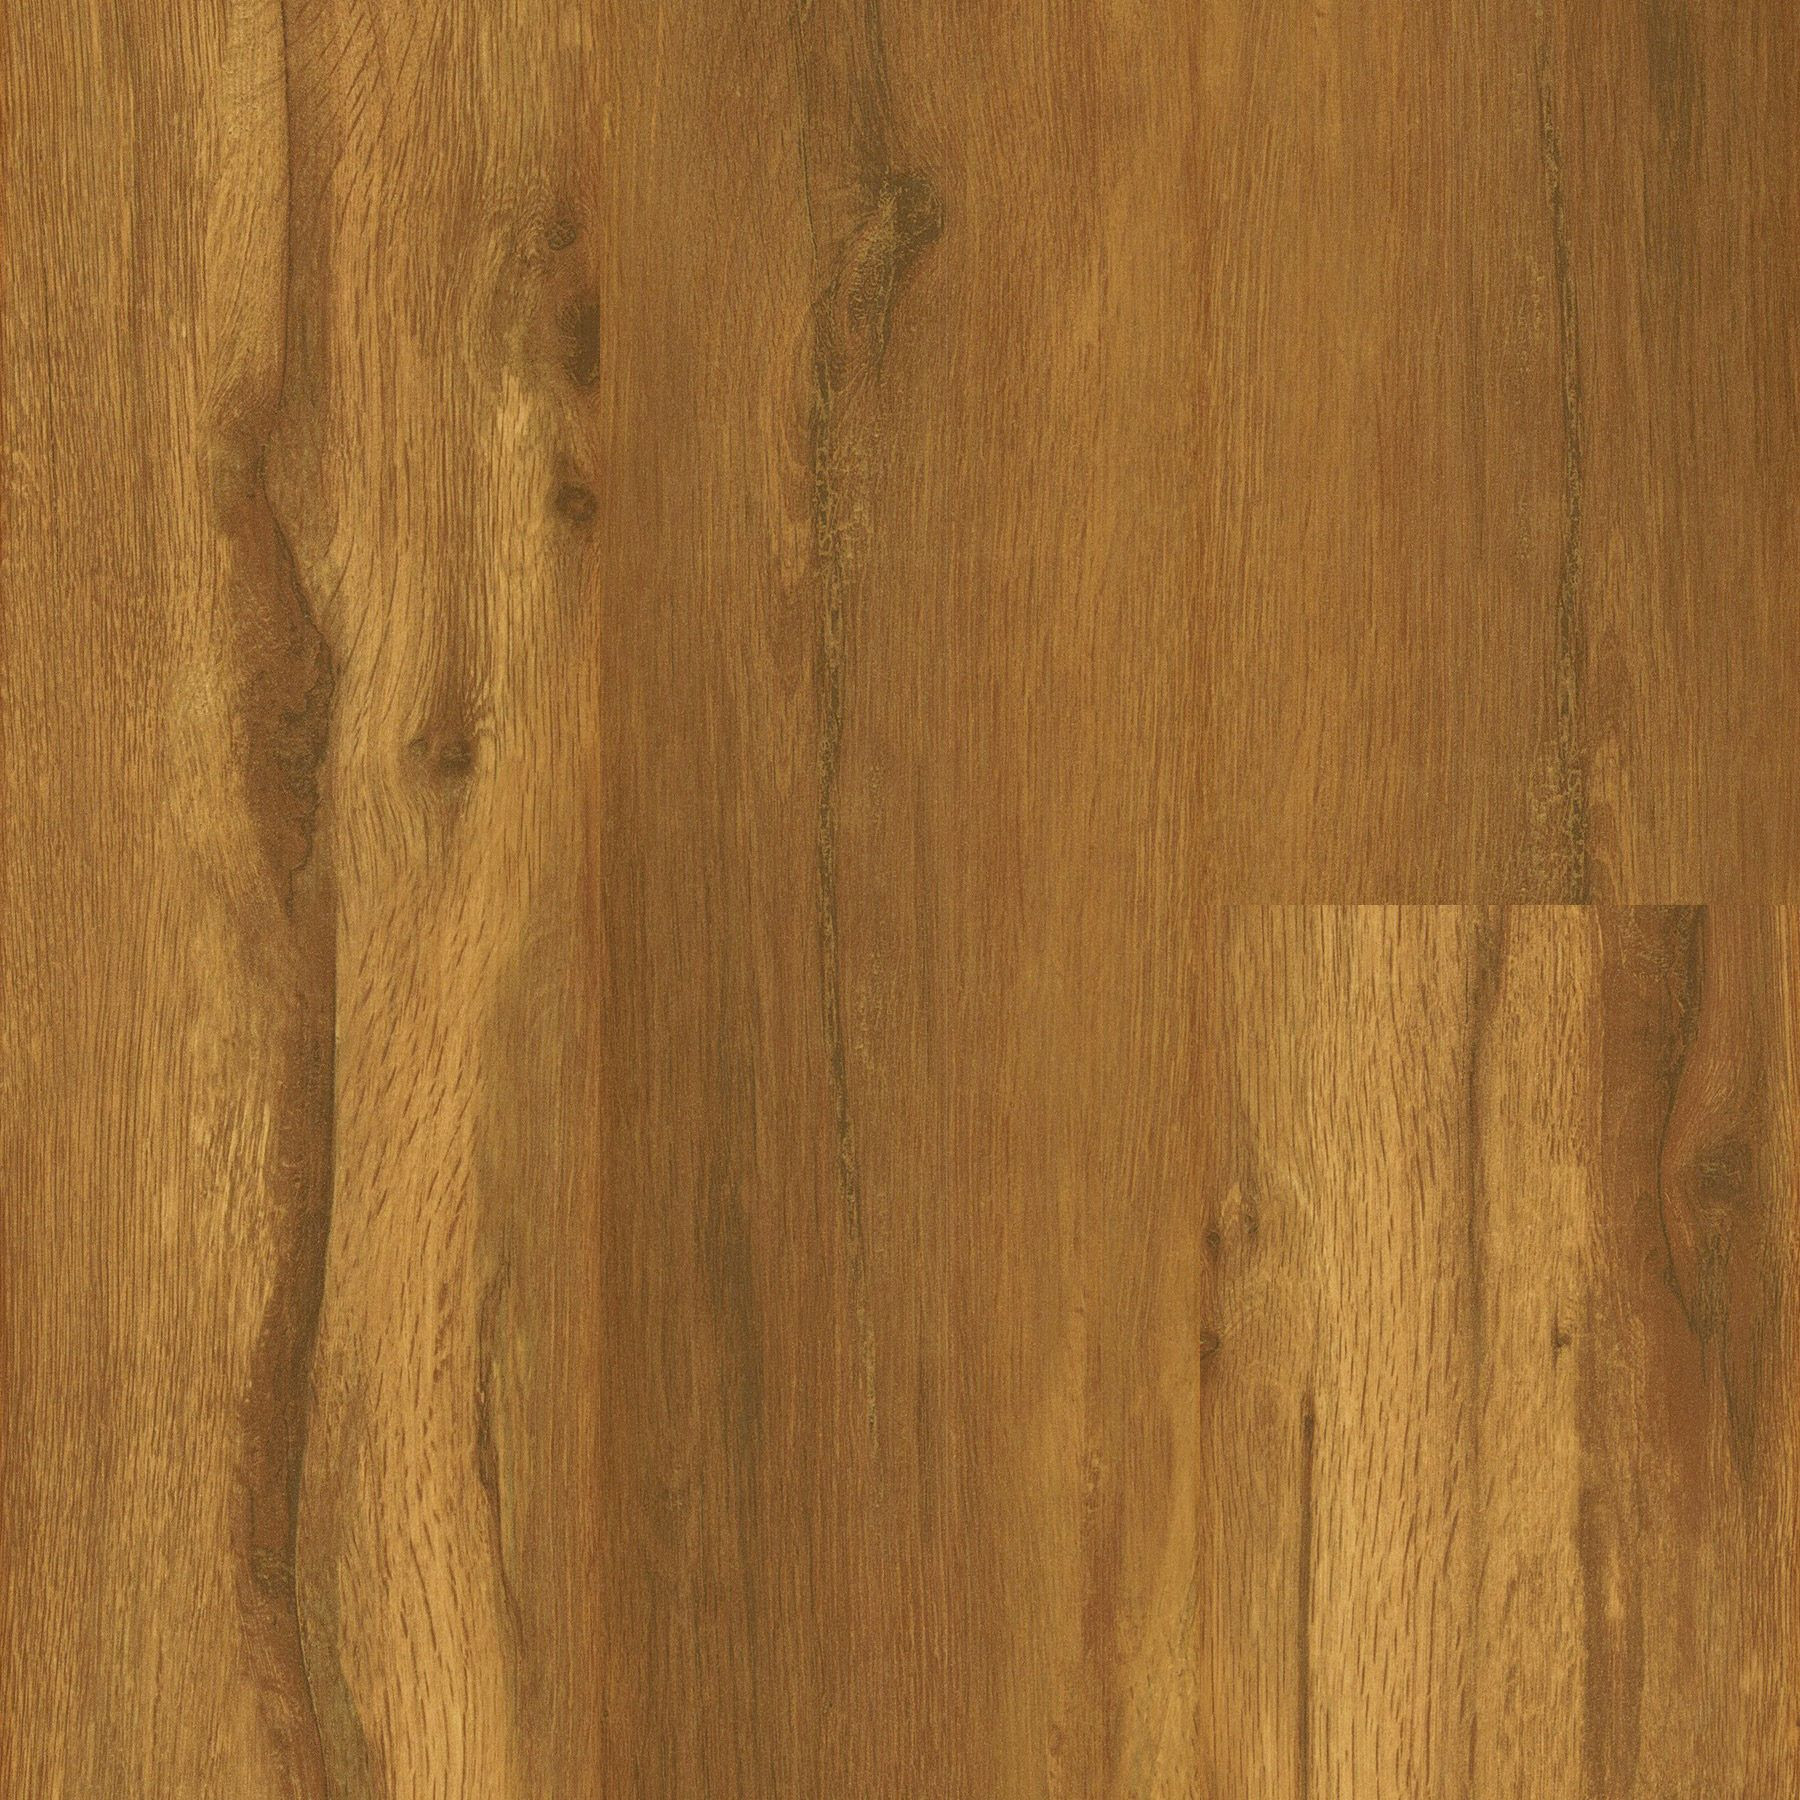 11 Popular Hardwood Floor Padding 2024 free download hardwood floor padding of kronotex cherry valley fletcher oak 12mm laminate d2752 with free with kronotex cherry valley fletcher oak 12mm laminate d2752 with free pad